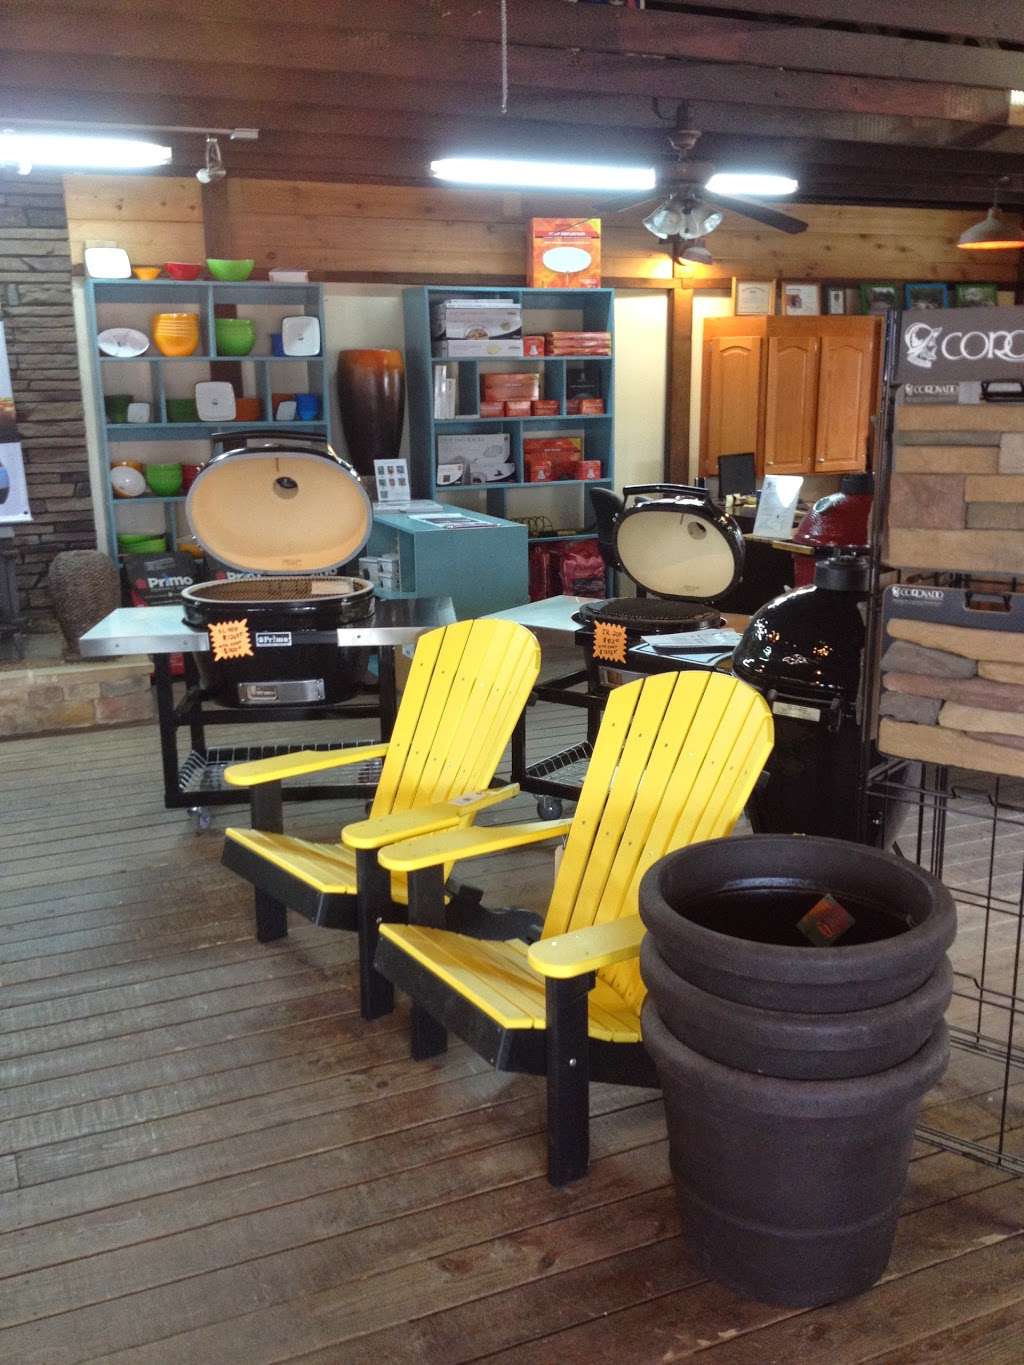 Visions Landscape Supply and Design | 2411 N Rocky River Rd, Monroe, NC 28110 | Phone: (704) 238-1900